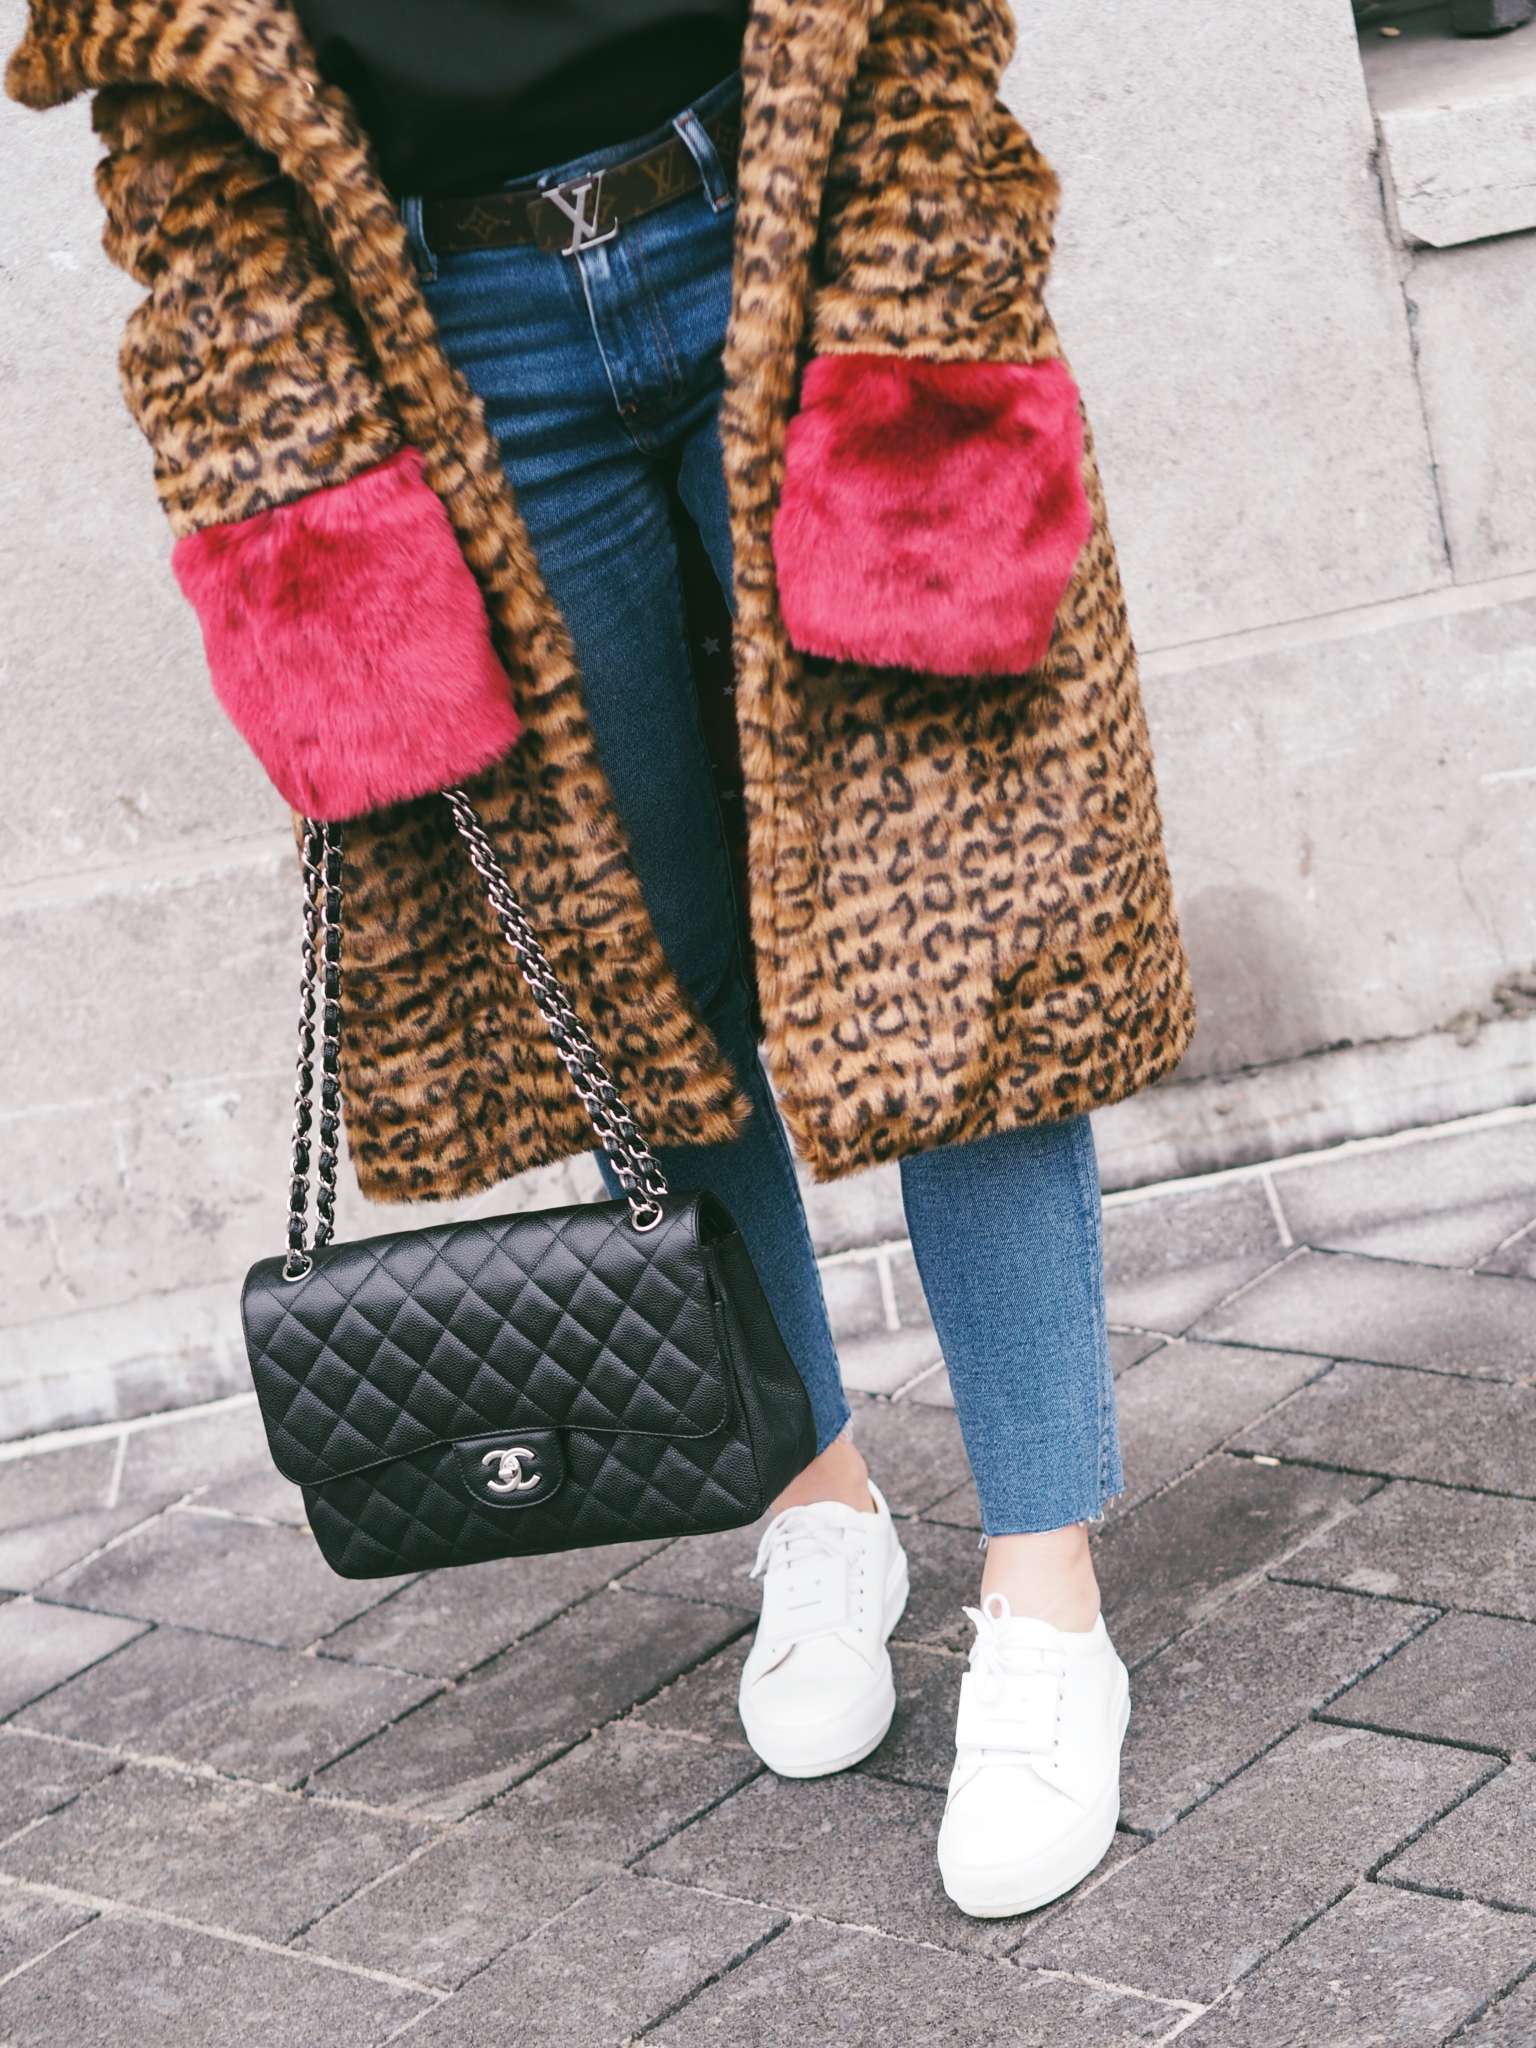 nickyinsideout - leopard print - new year resolutions - fall/winter inspiration - Etsy - faux fur - jacket/coat - street style - Etsy Resolution - full time blogger